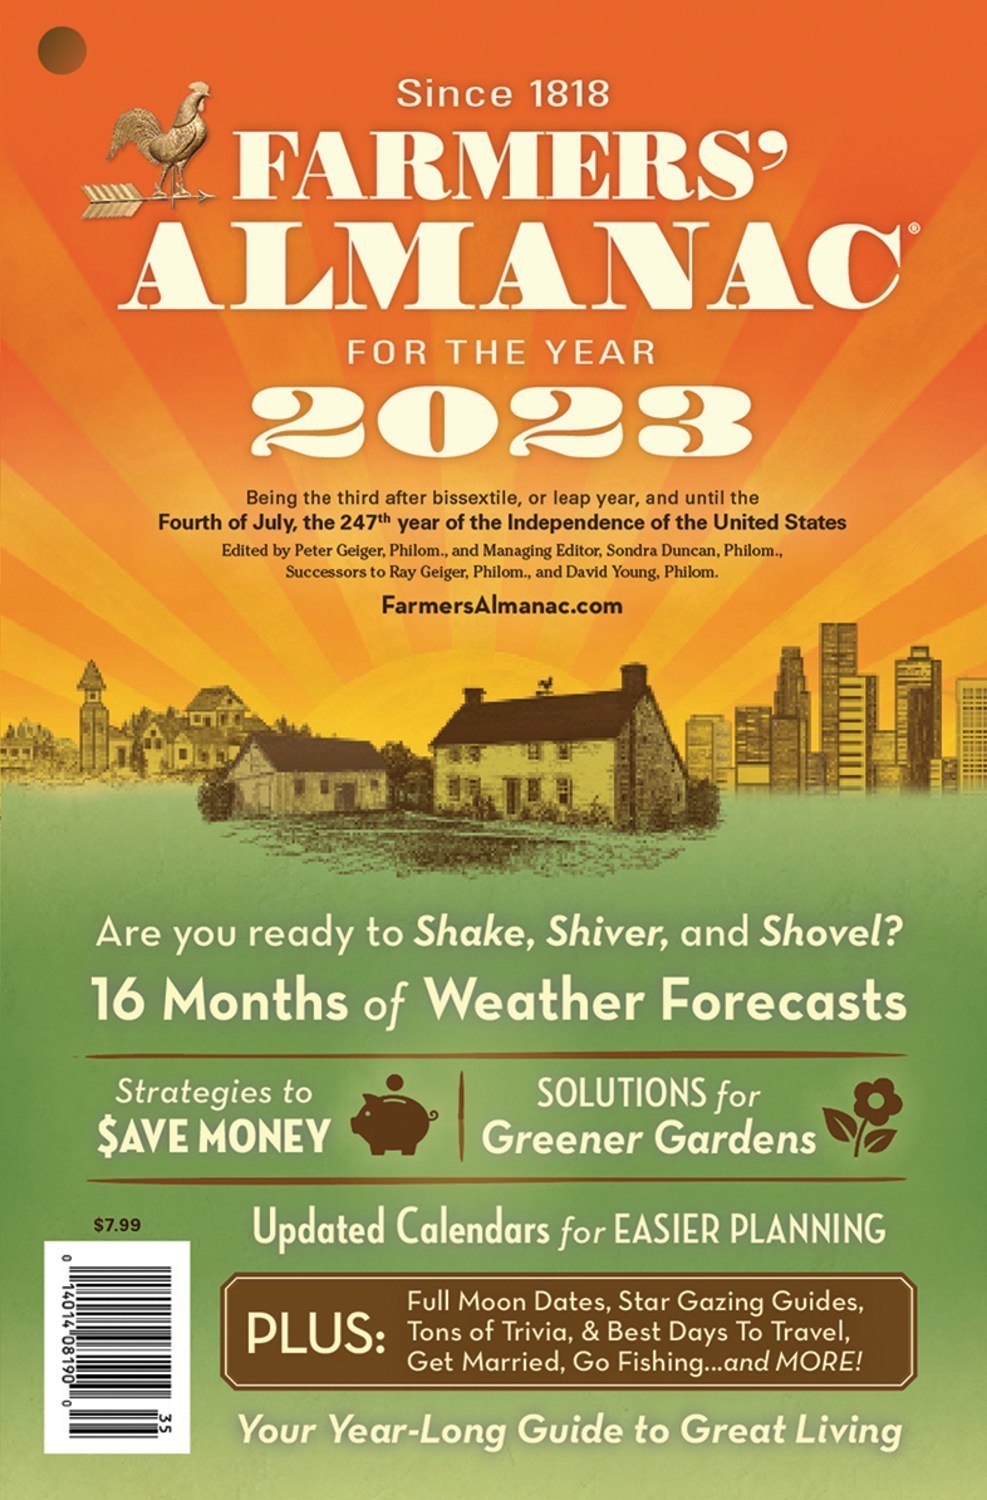 Farmers' Almanac Predicts Extreme Winter for the USA